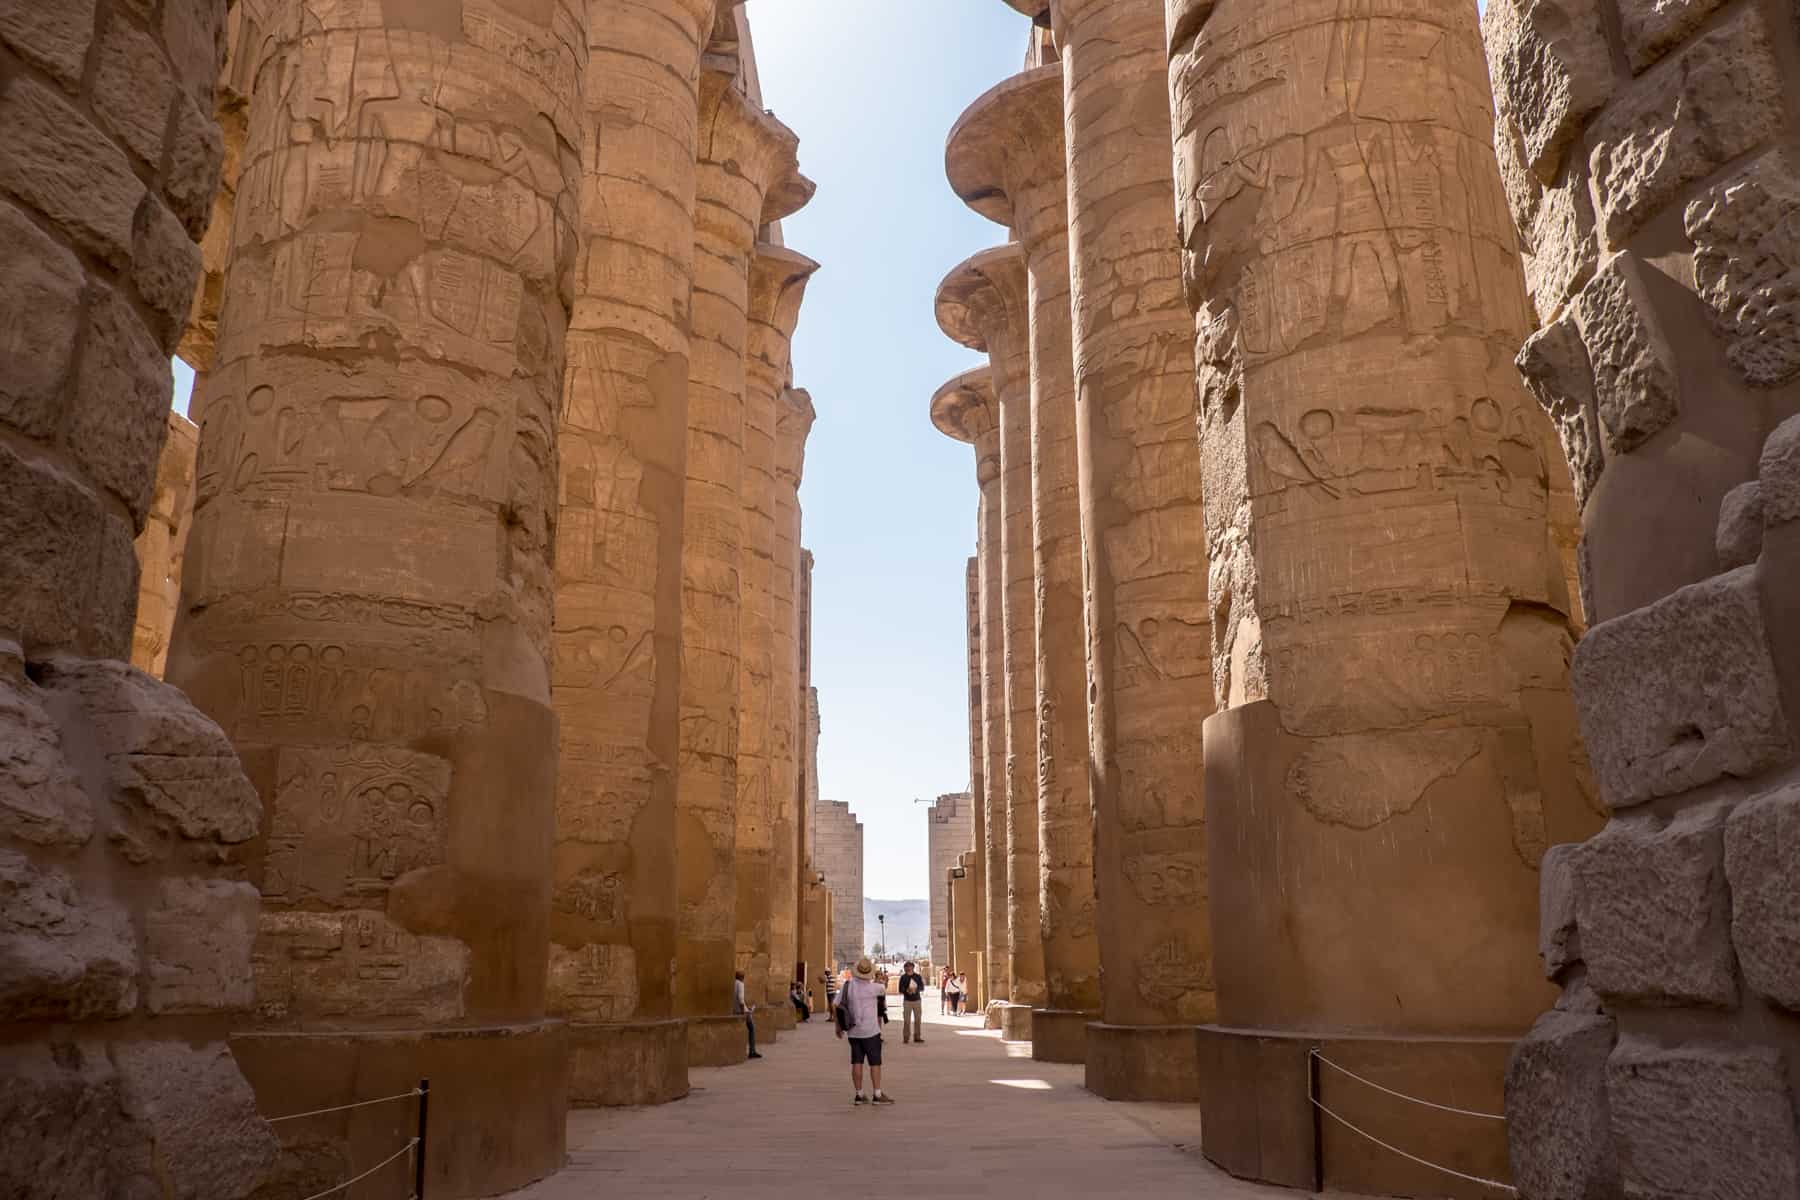 A man walks through one of the rooms at Karnak Temple in Luxor known for its rows of tall, colossal columns